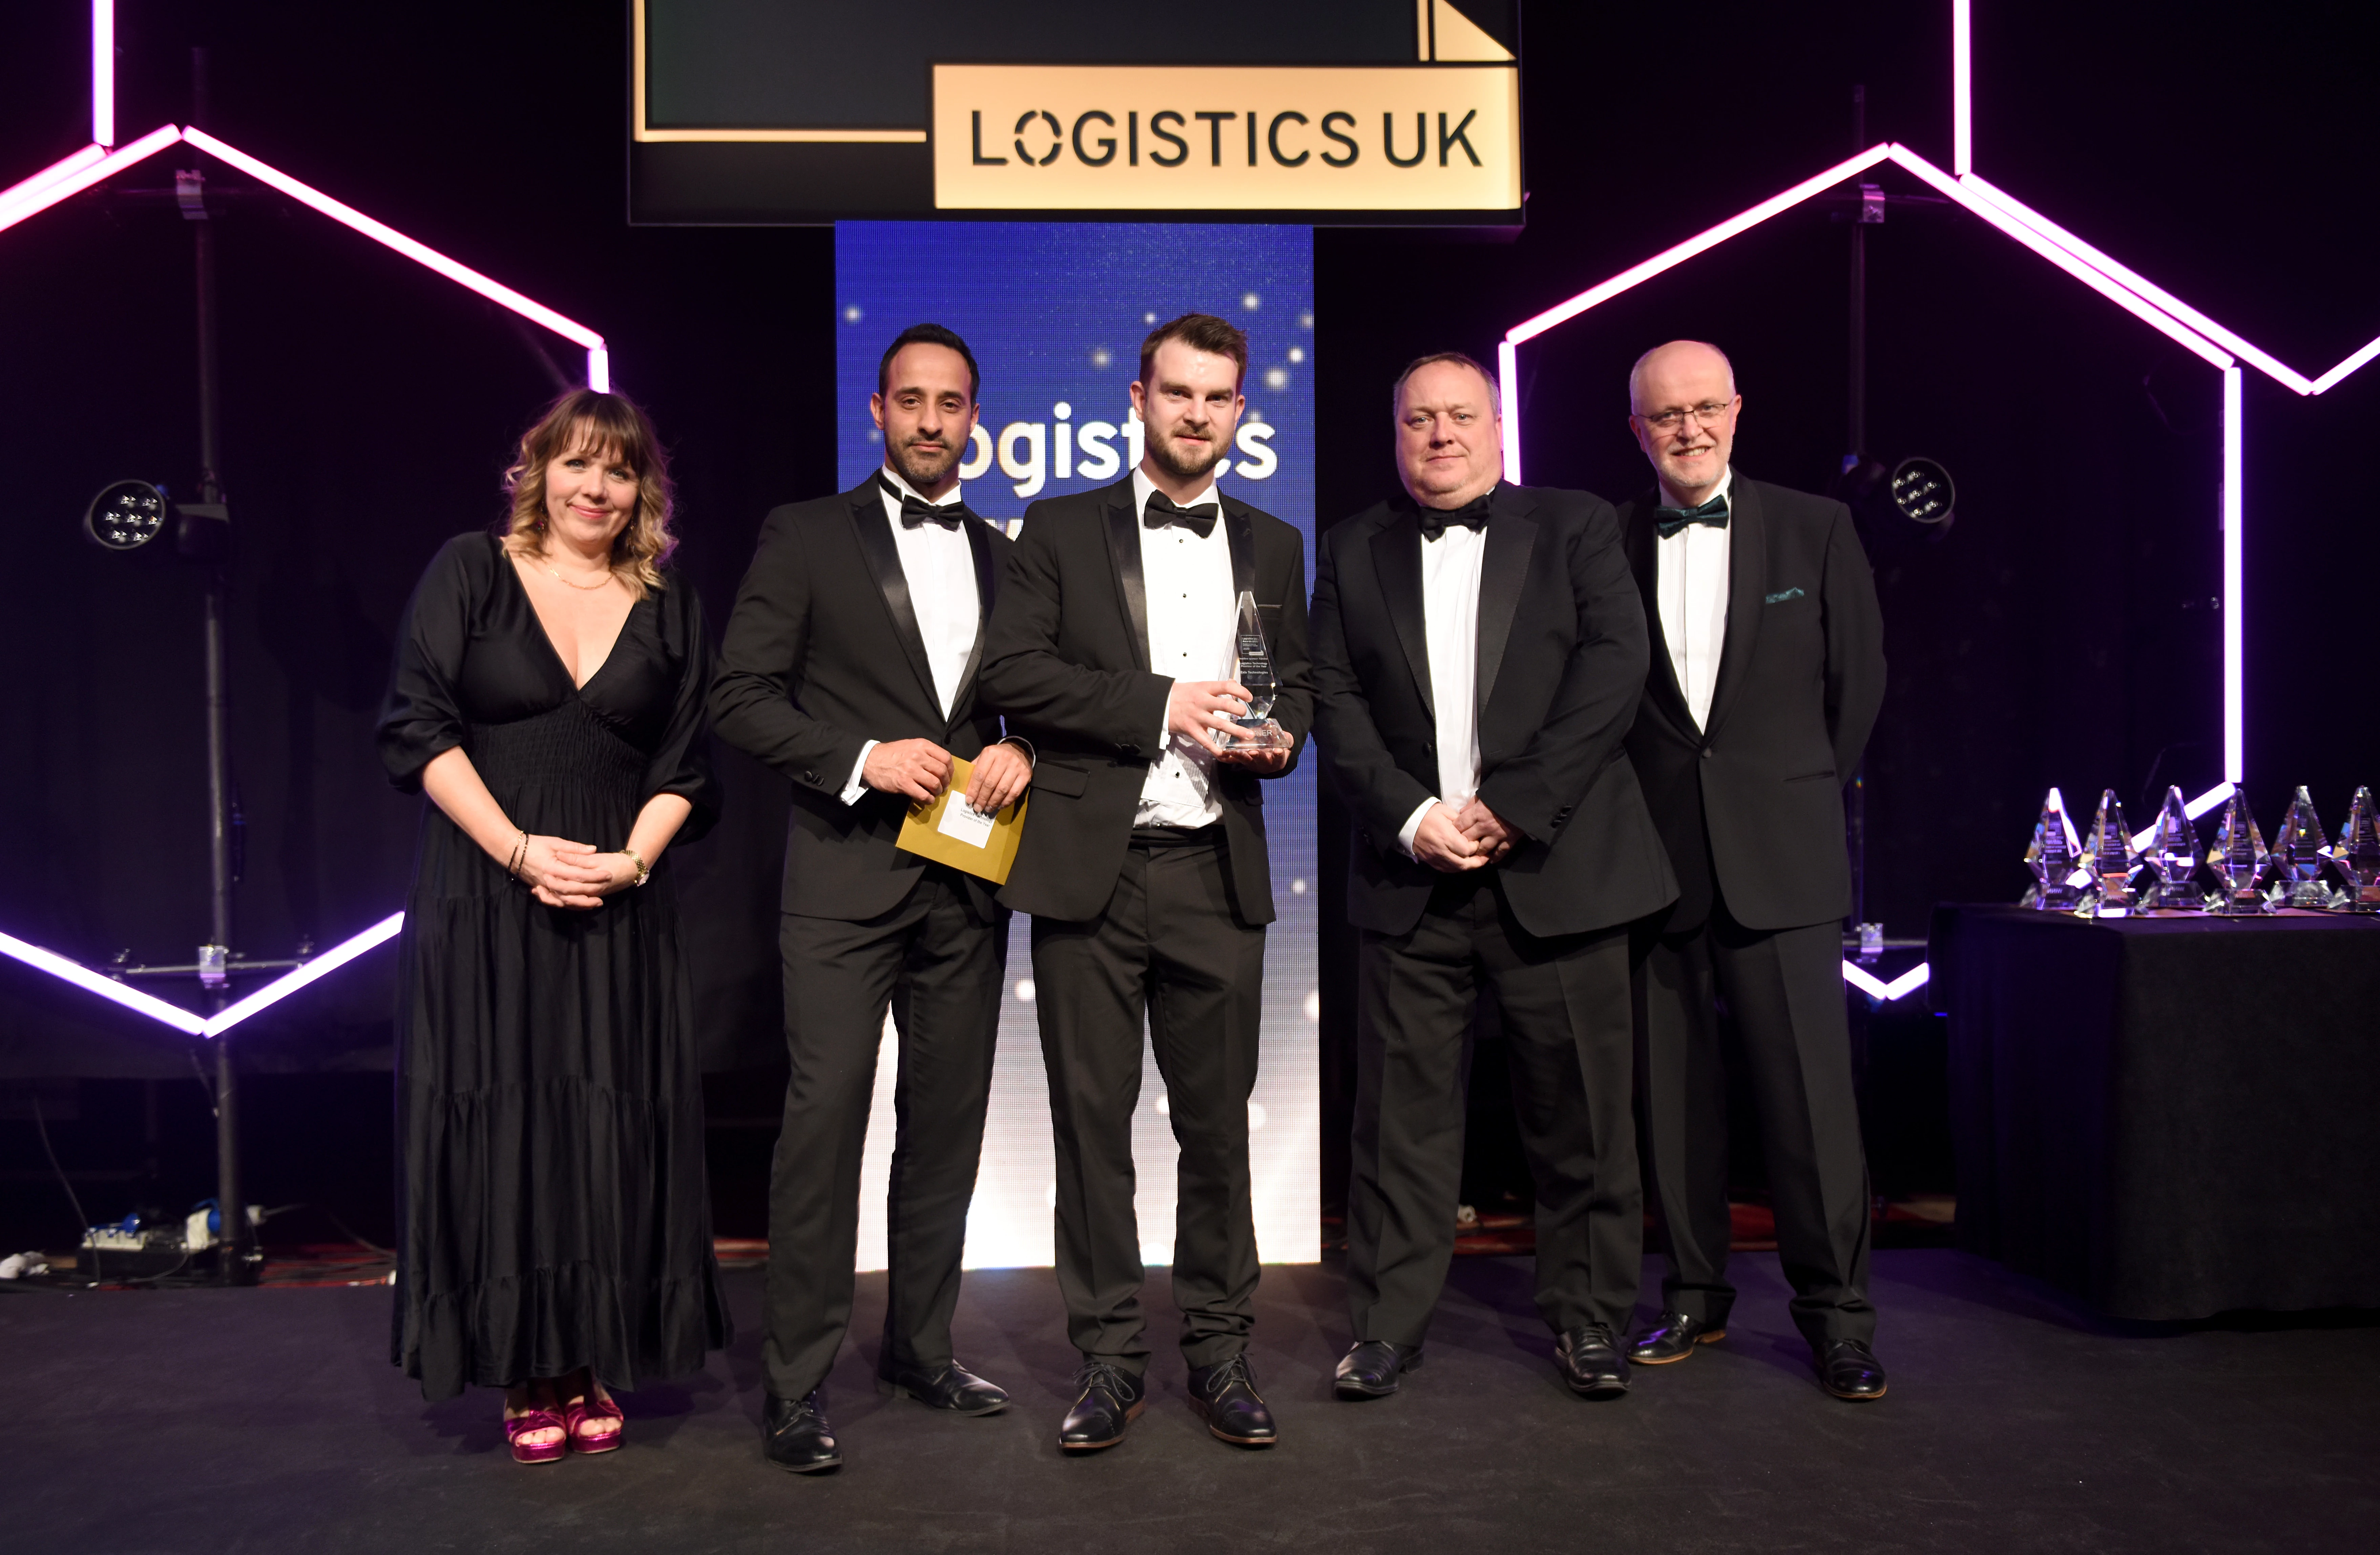 Jamie Baldasera (centre) and Andy Rutter (2nd from right) receiving the award for Exis Technologies